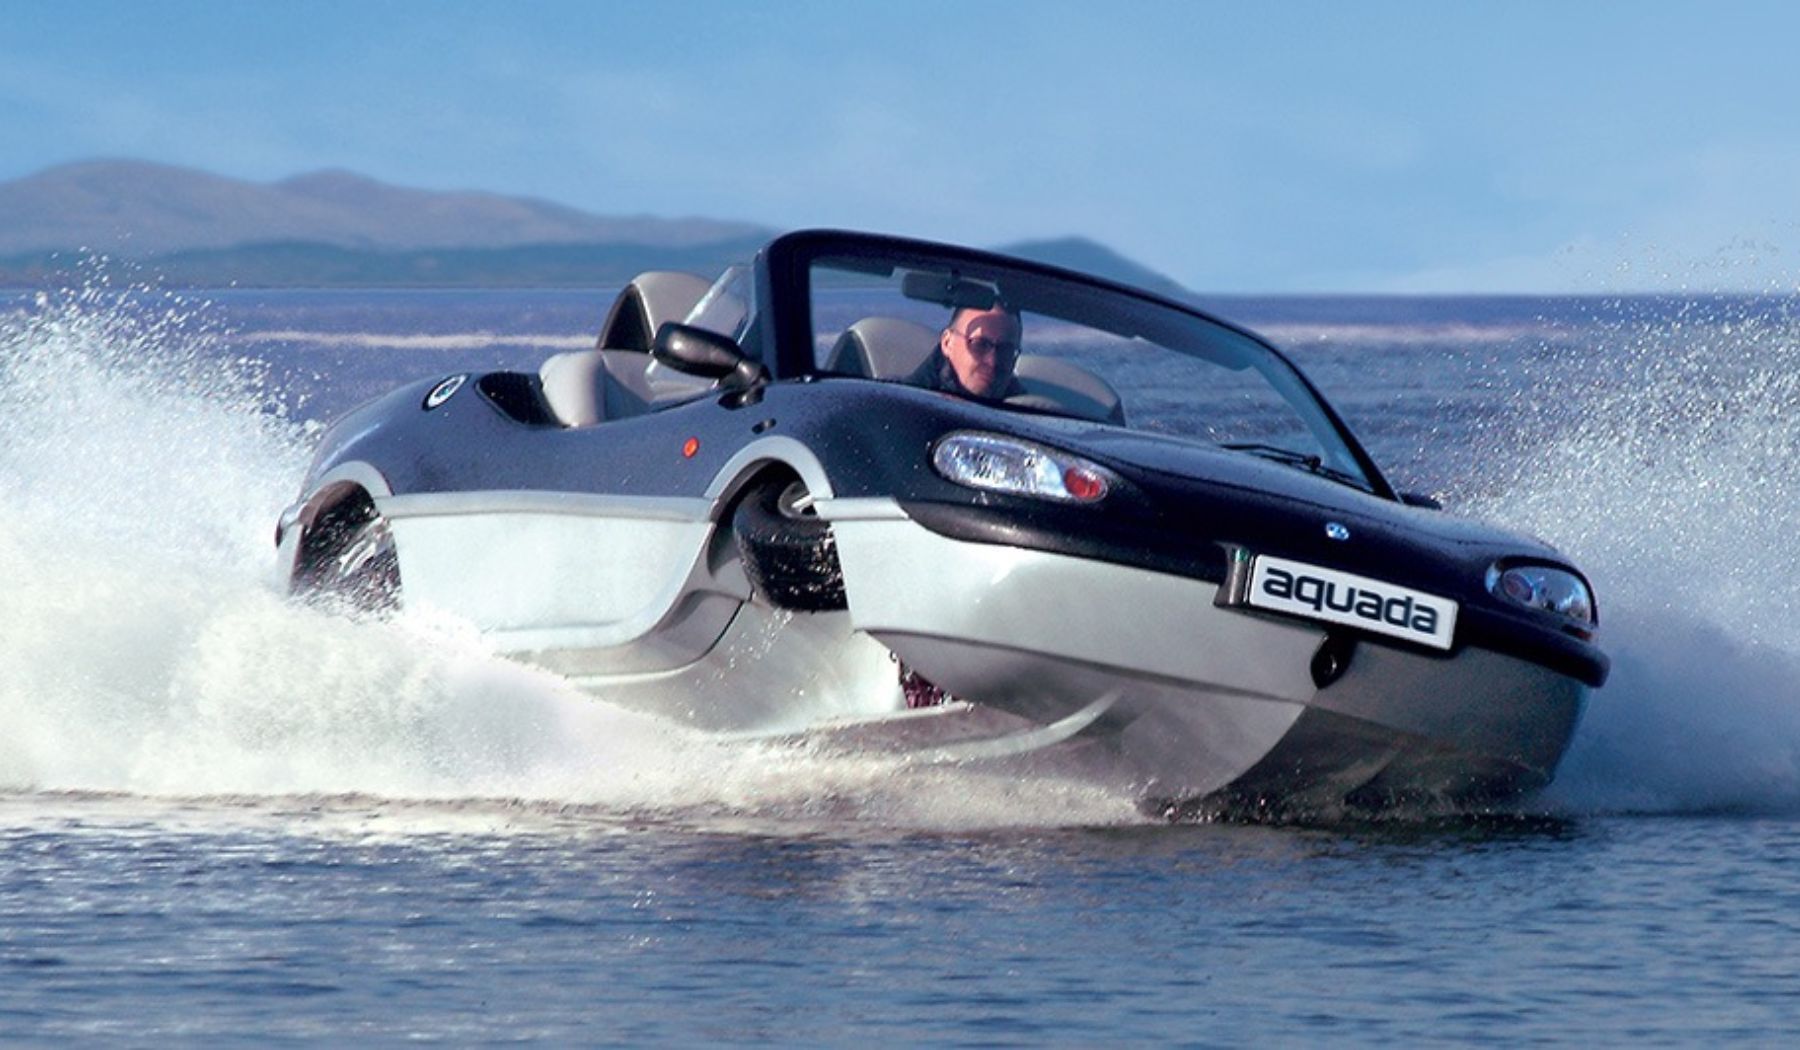 WaterCar, whether on land or sea, off to speedy start